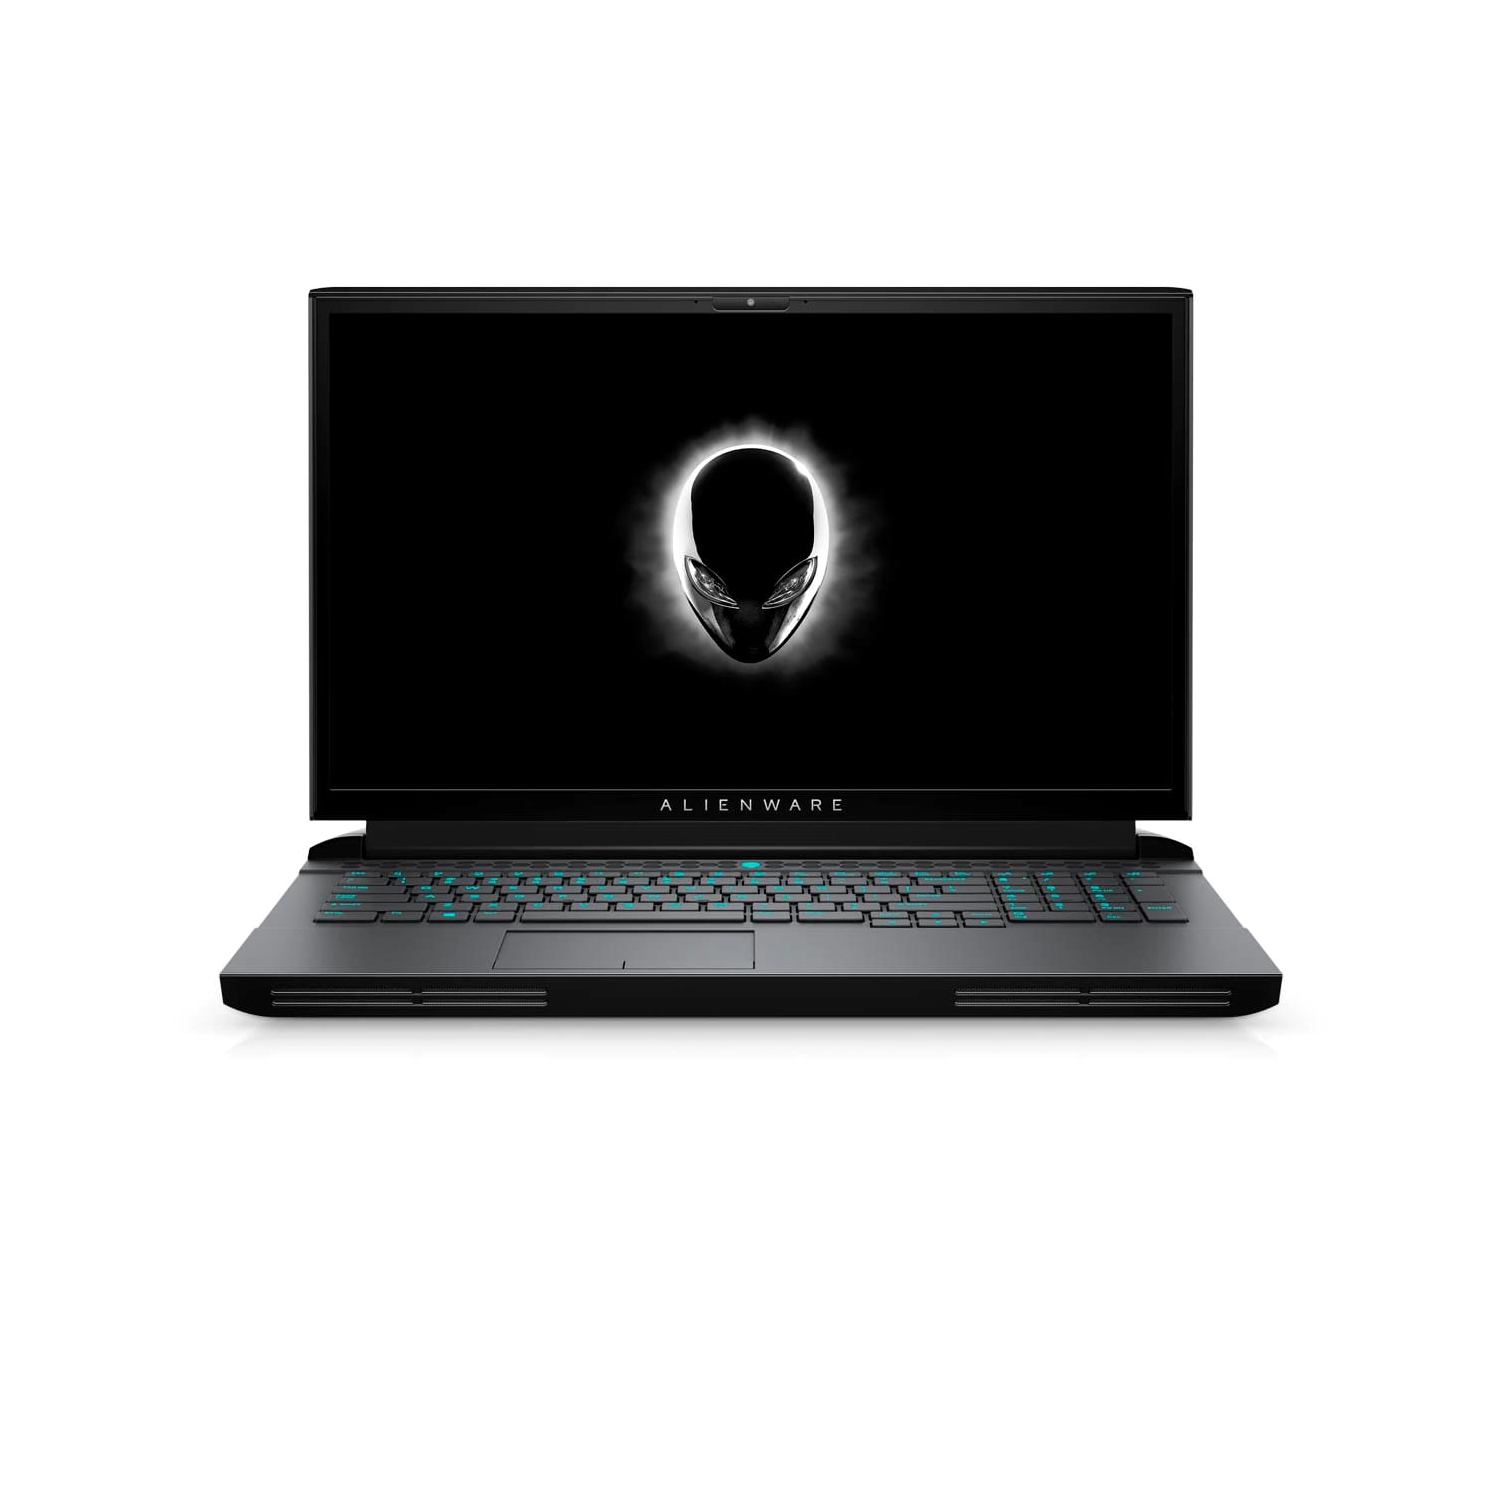 Refurbished (Excellent) - Dell Alienware 17 51m R2 Gaming Laptop (2020) | 17.3" FHD | Core i7 - 1TB SSD + 1TB SSD - 32GB RAM - RTX 2060 | 4.8 GHz - 10th Gen CPU Certified